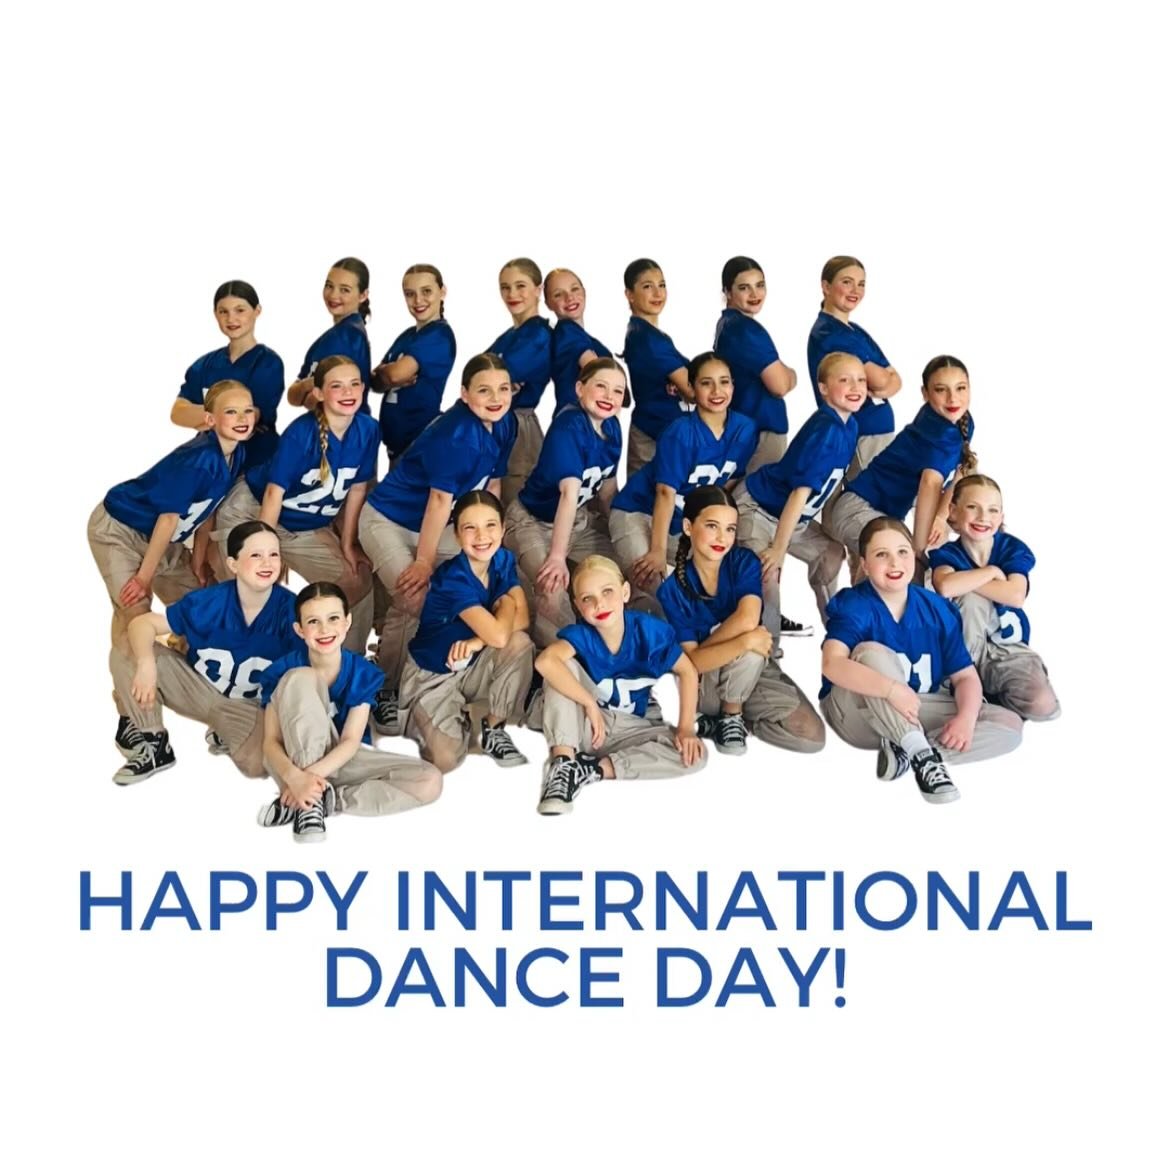 From Our Dance Community to yours HAPPY INTERNATIONAL DANCE DAY. 🌈